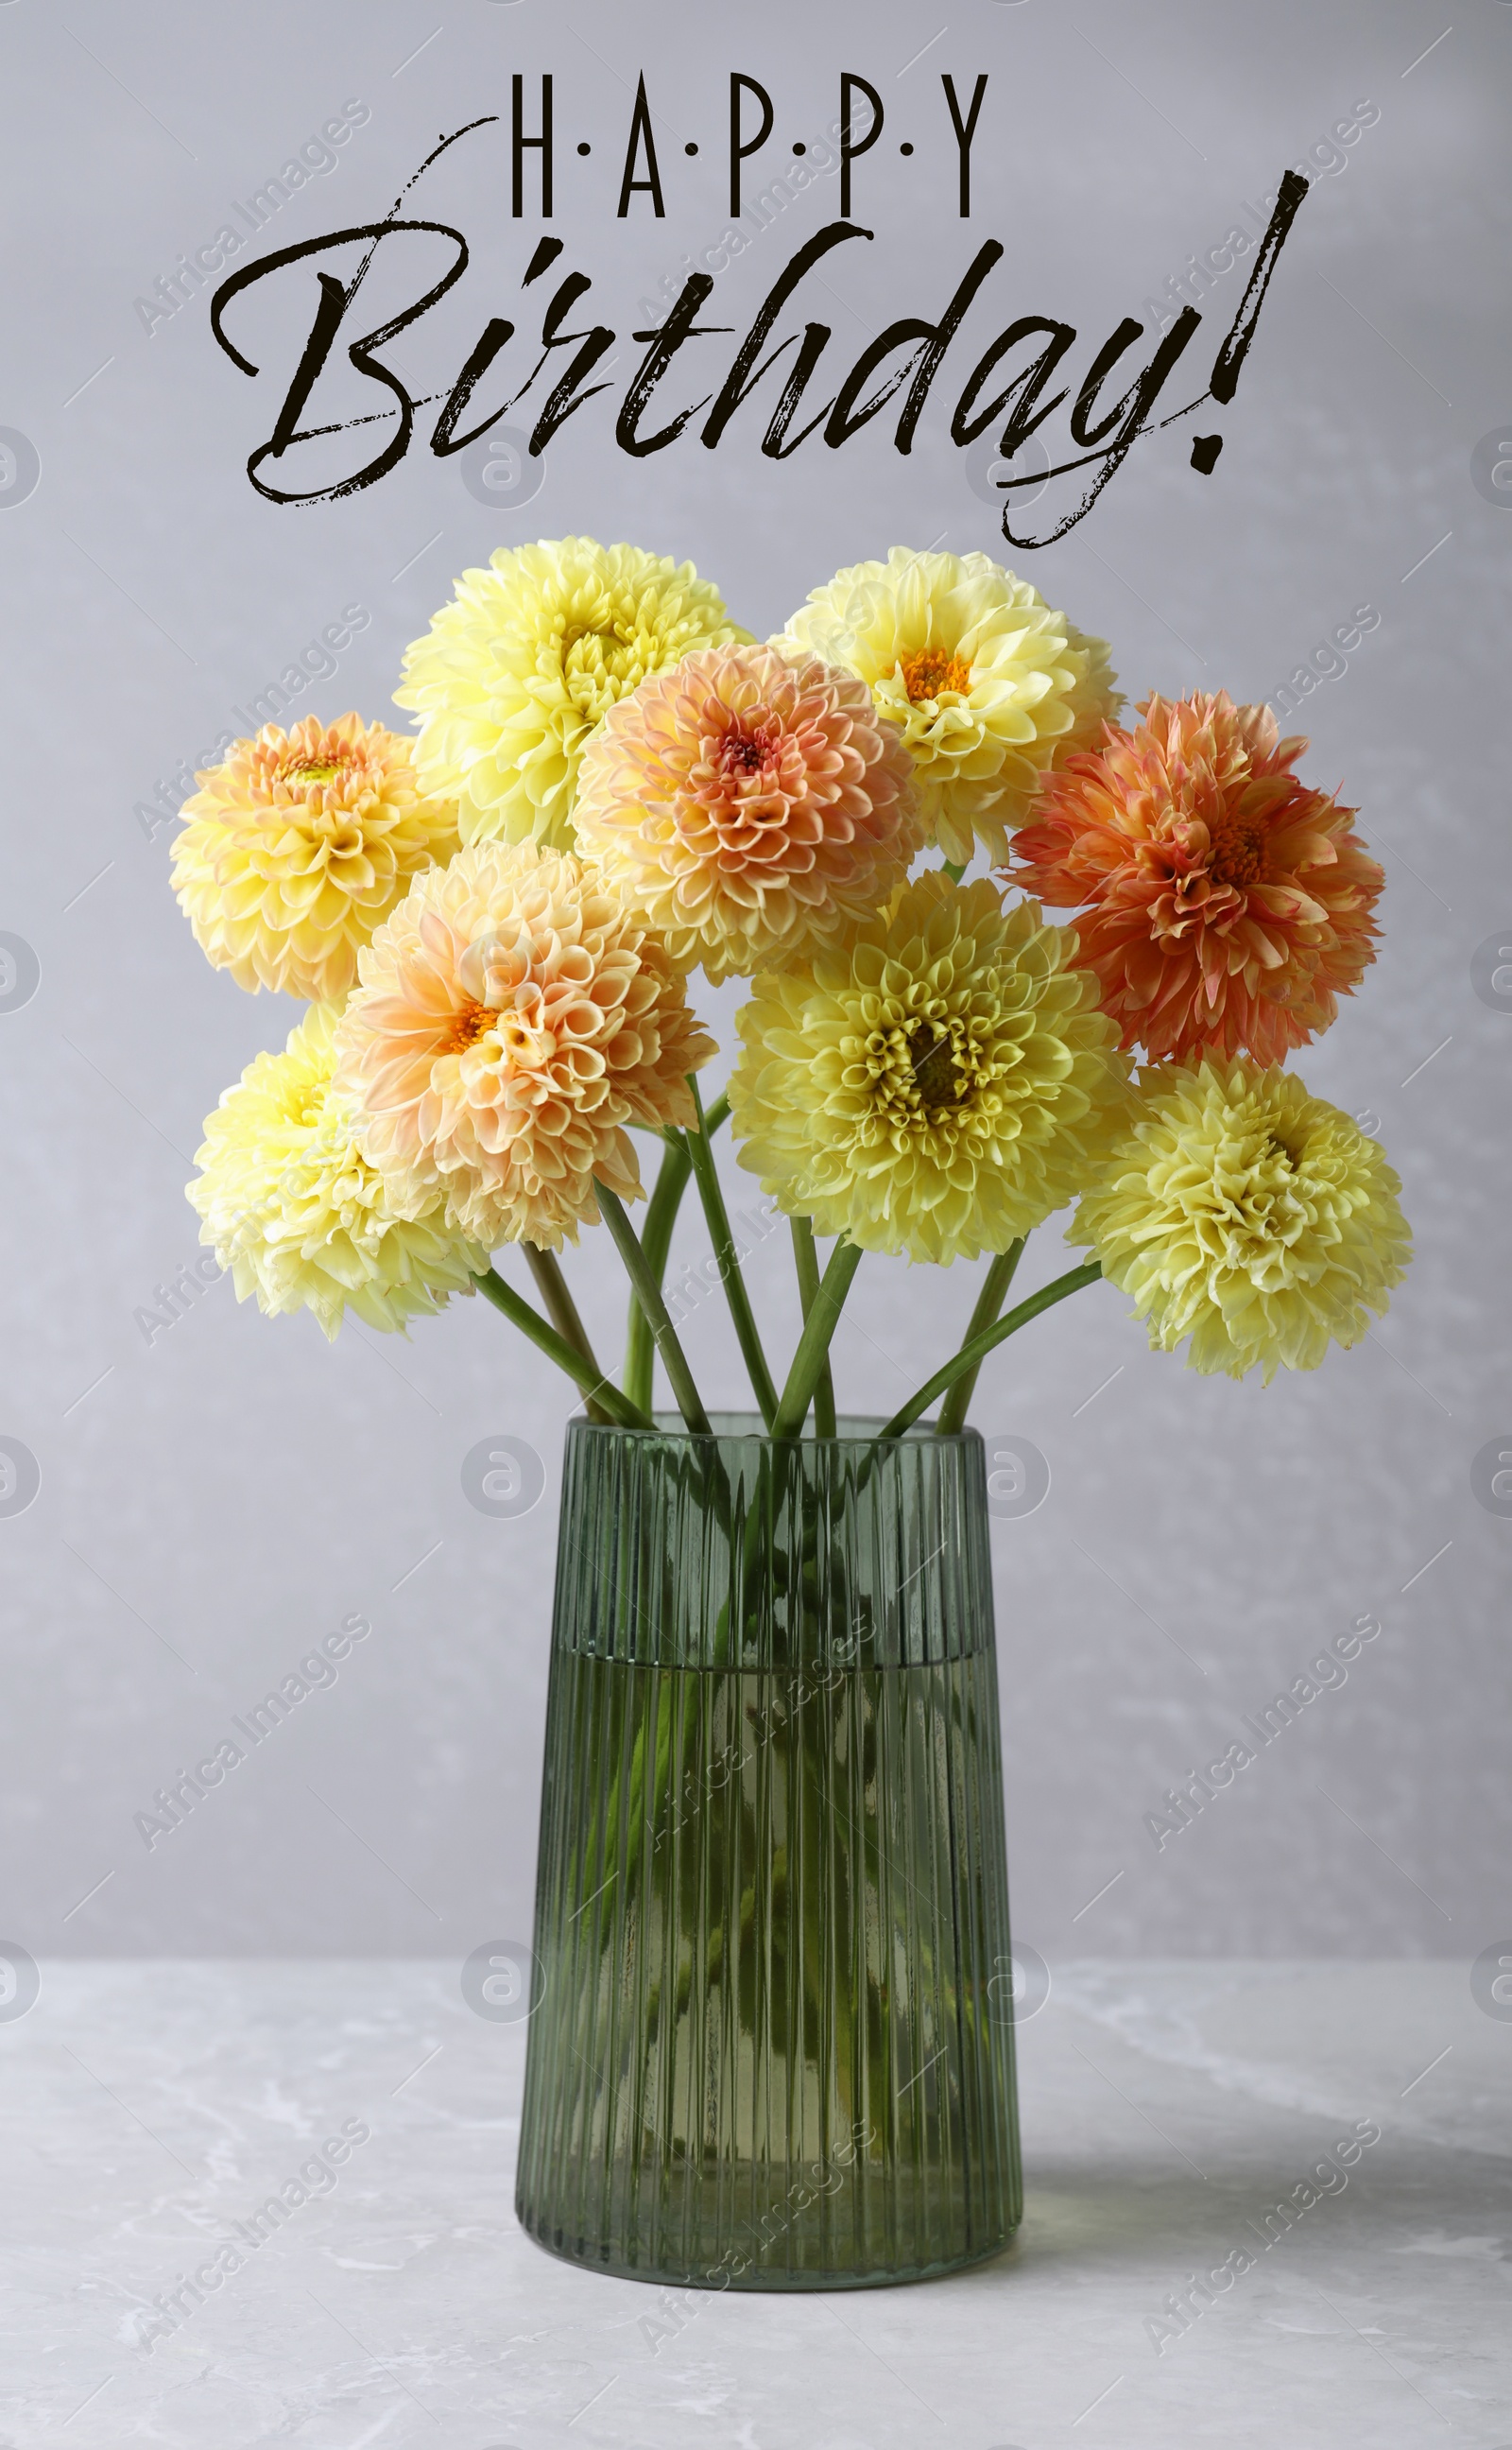 Image of Happy Birthday! Beautiful yellow dahlia flowers in vase on table against grey background